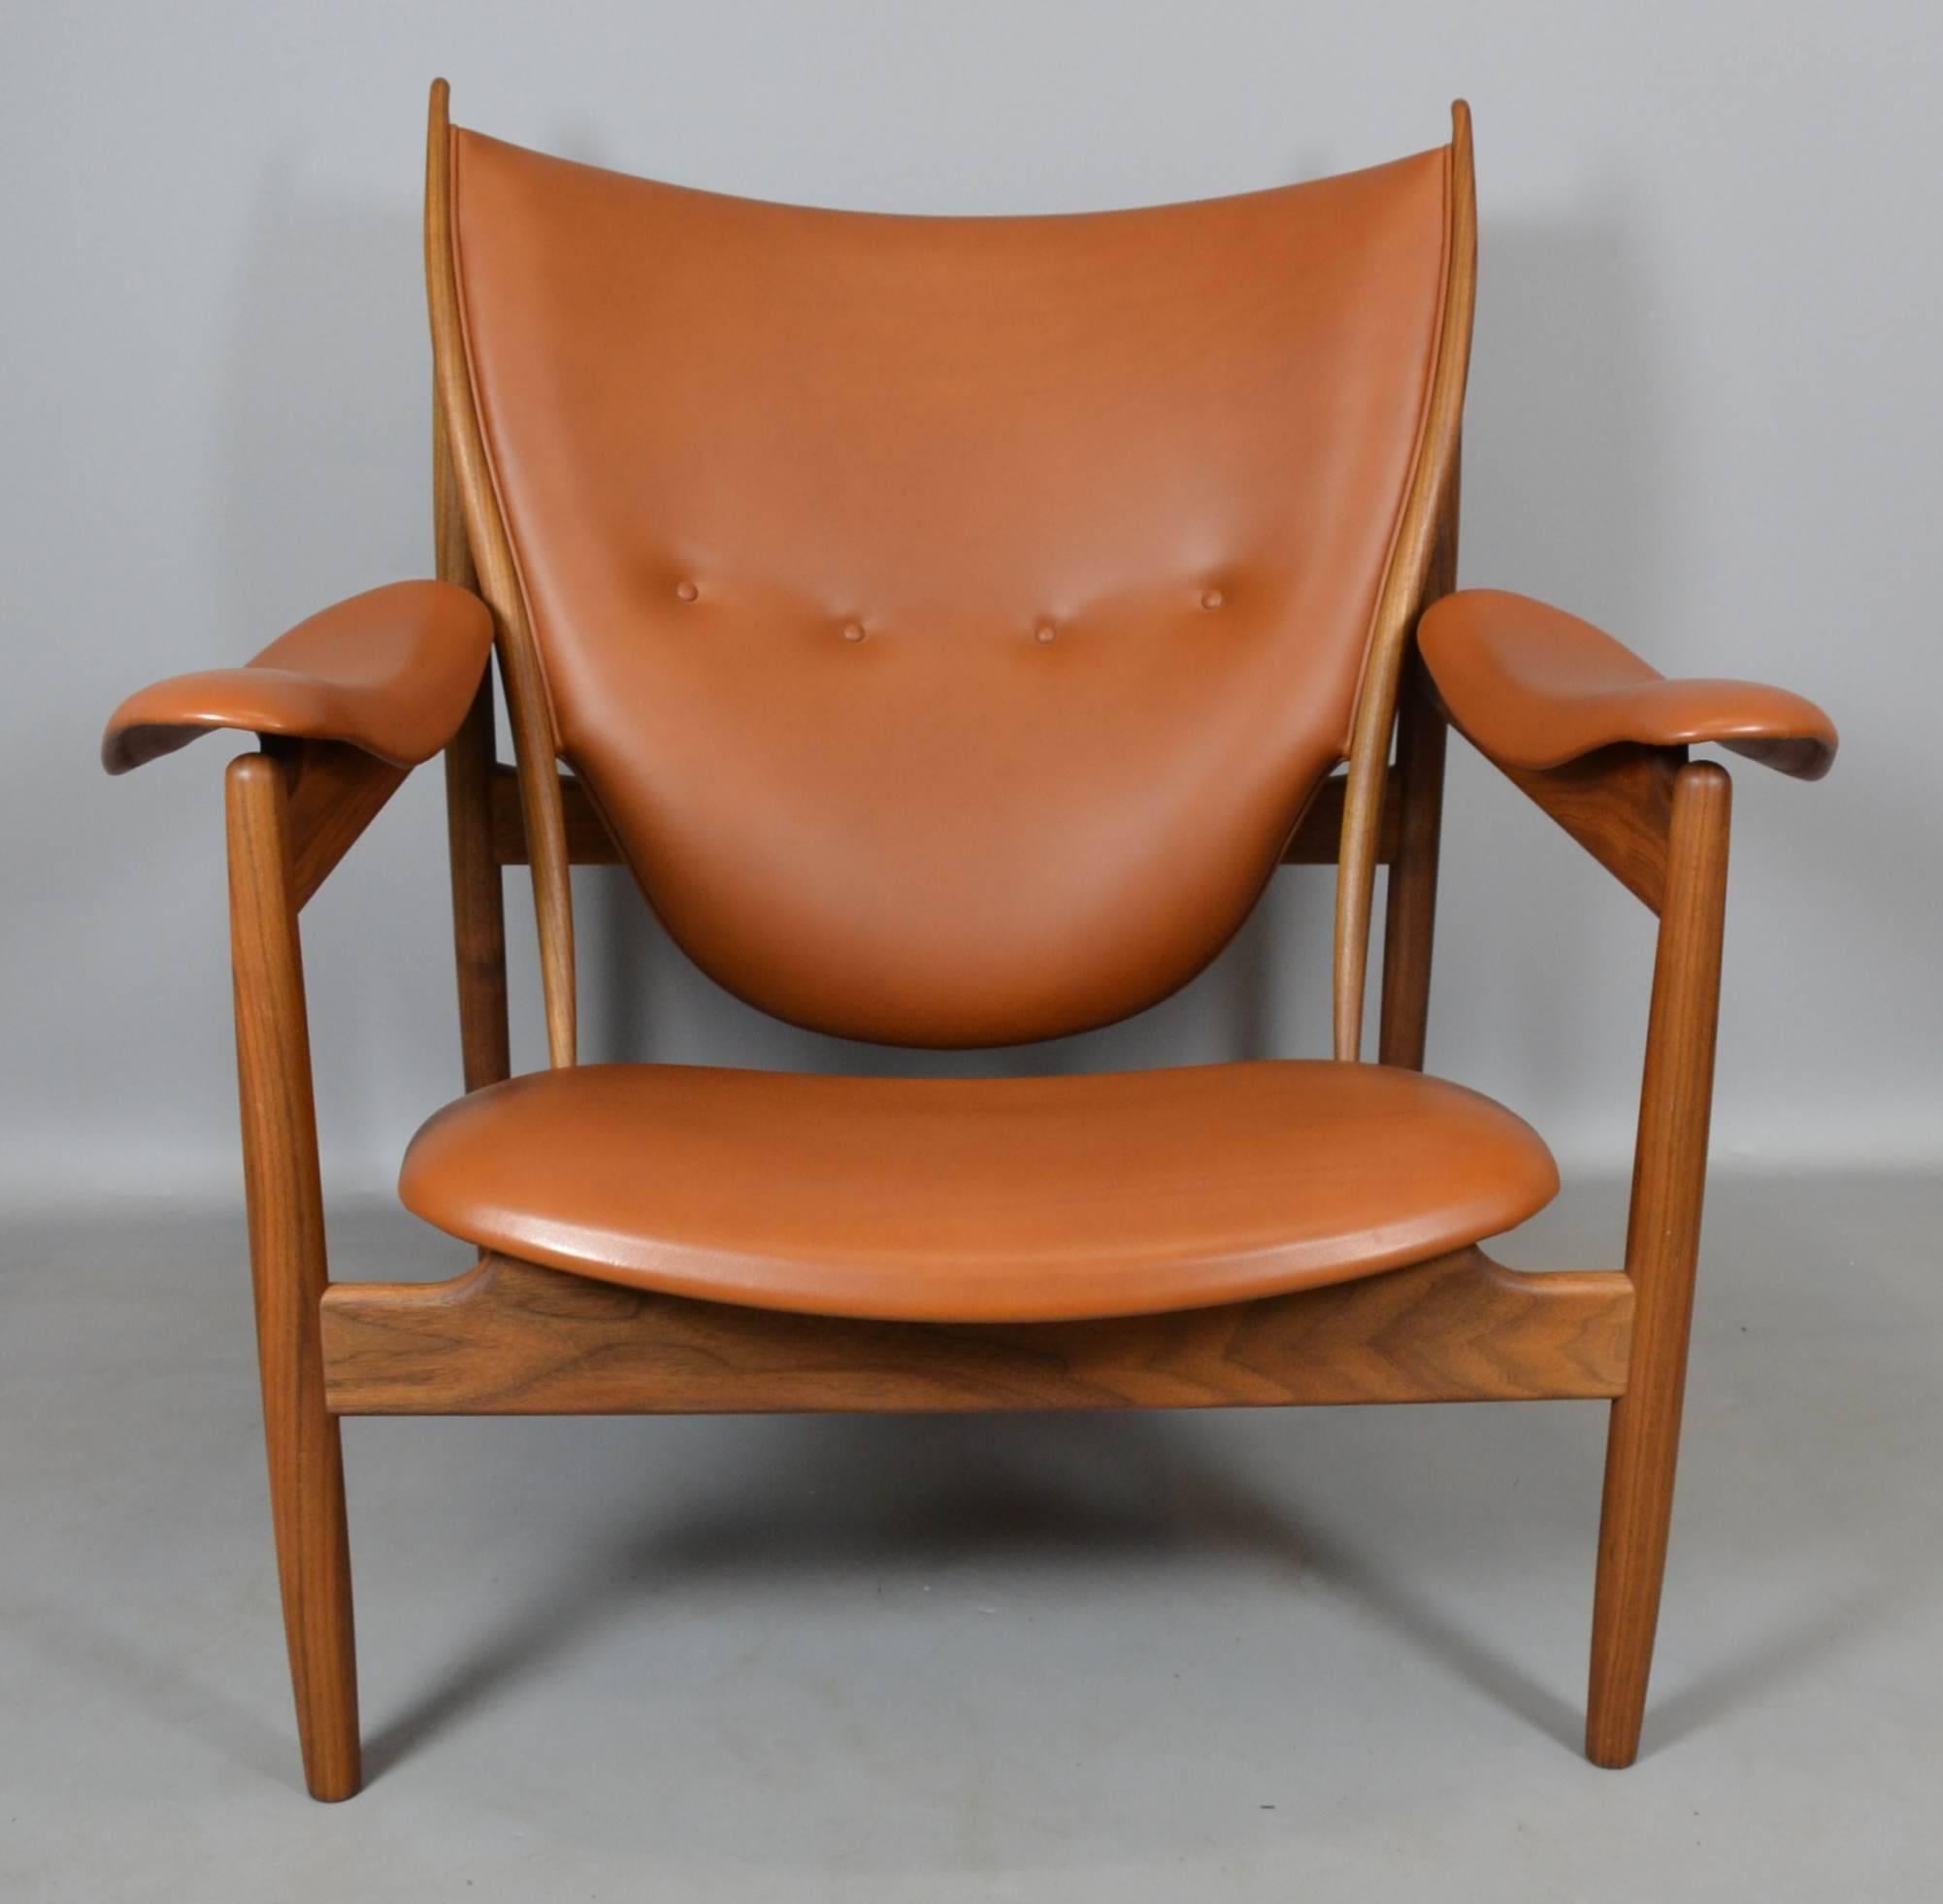 Designed by Finn Juhl in 1949, produced by Onecollection.
Frame in walnut, upholstery in cognac leather.
 